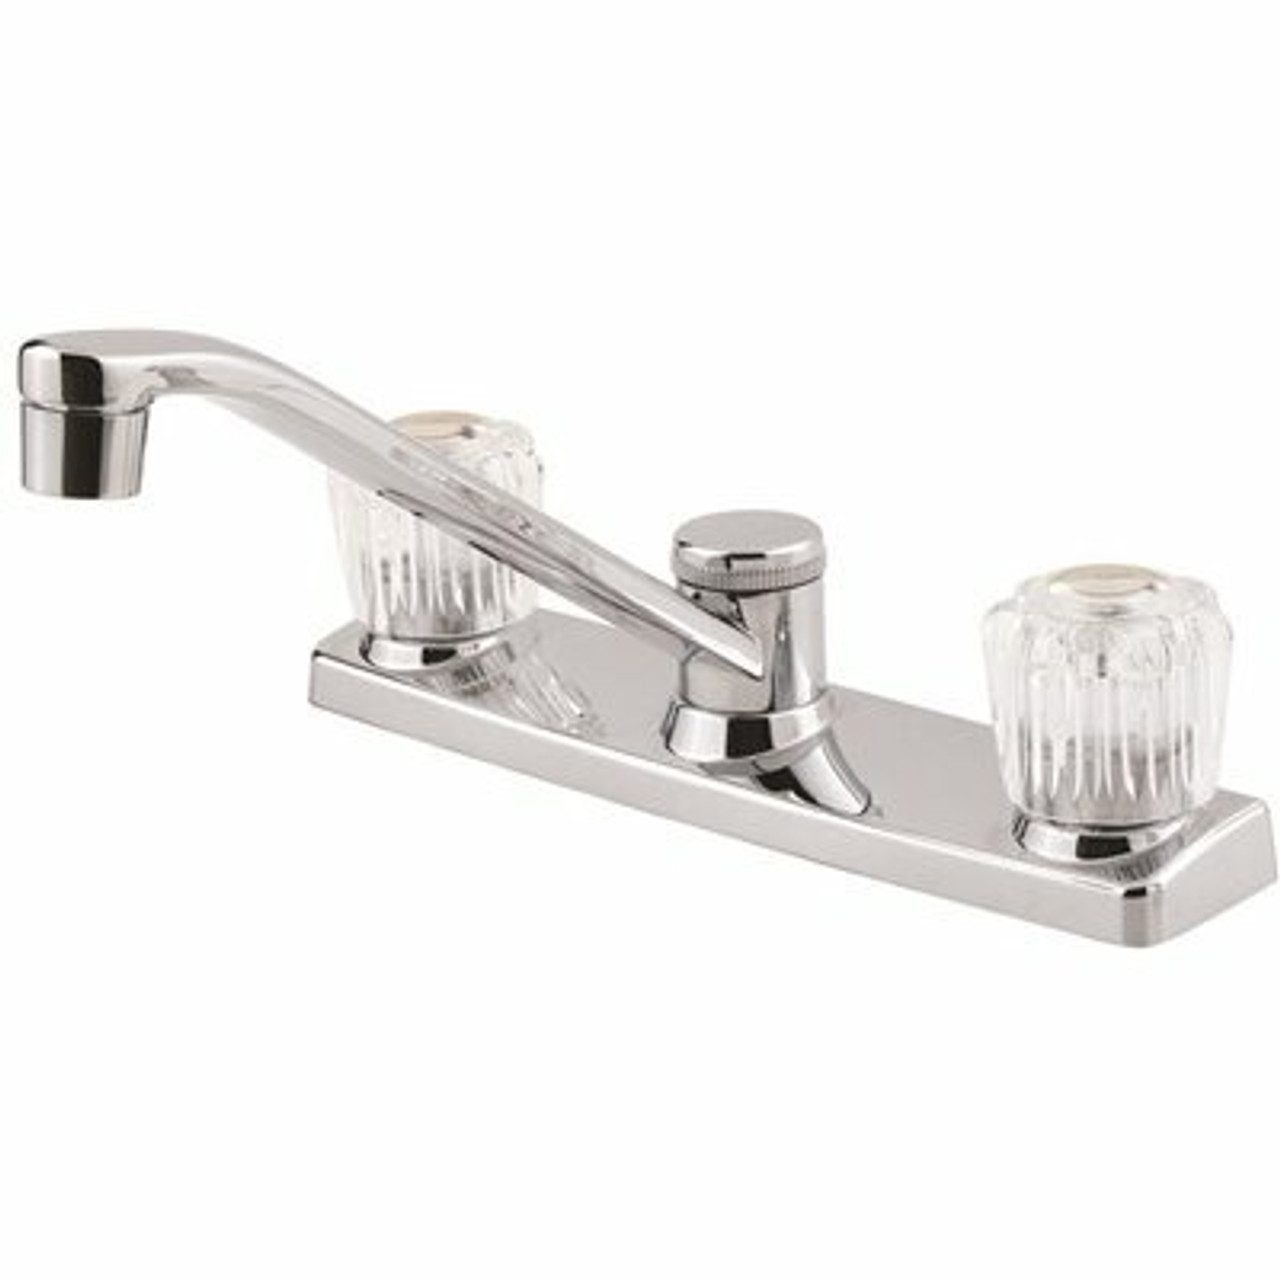 Pfister Pfirst Series 2-Handle Kitchen Faucet In Polished Chrome